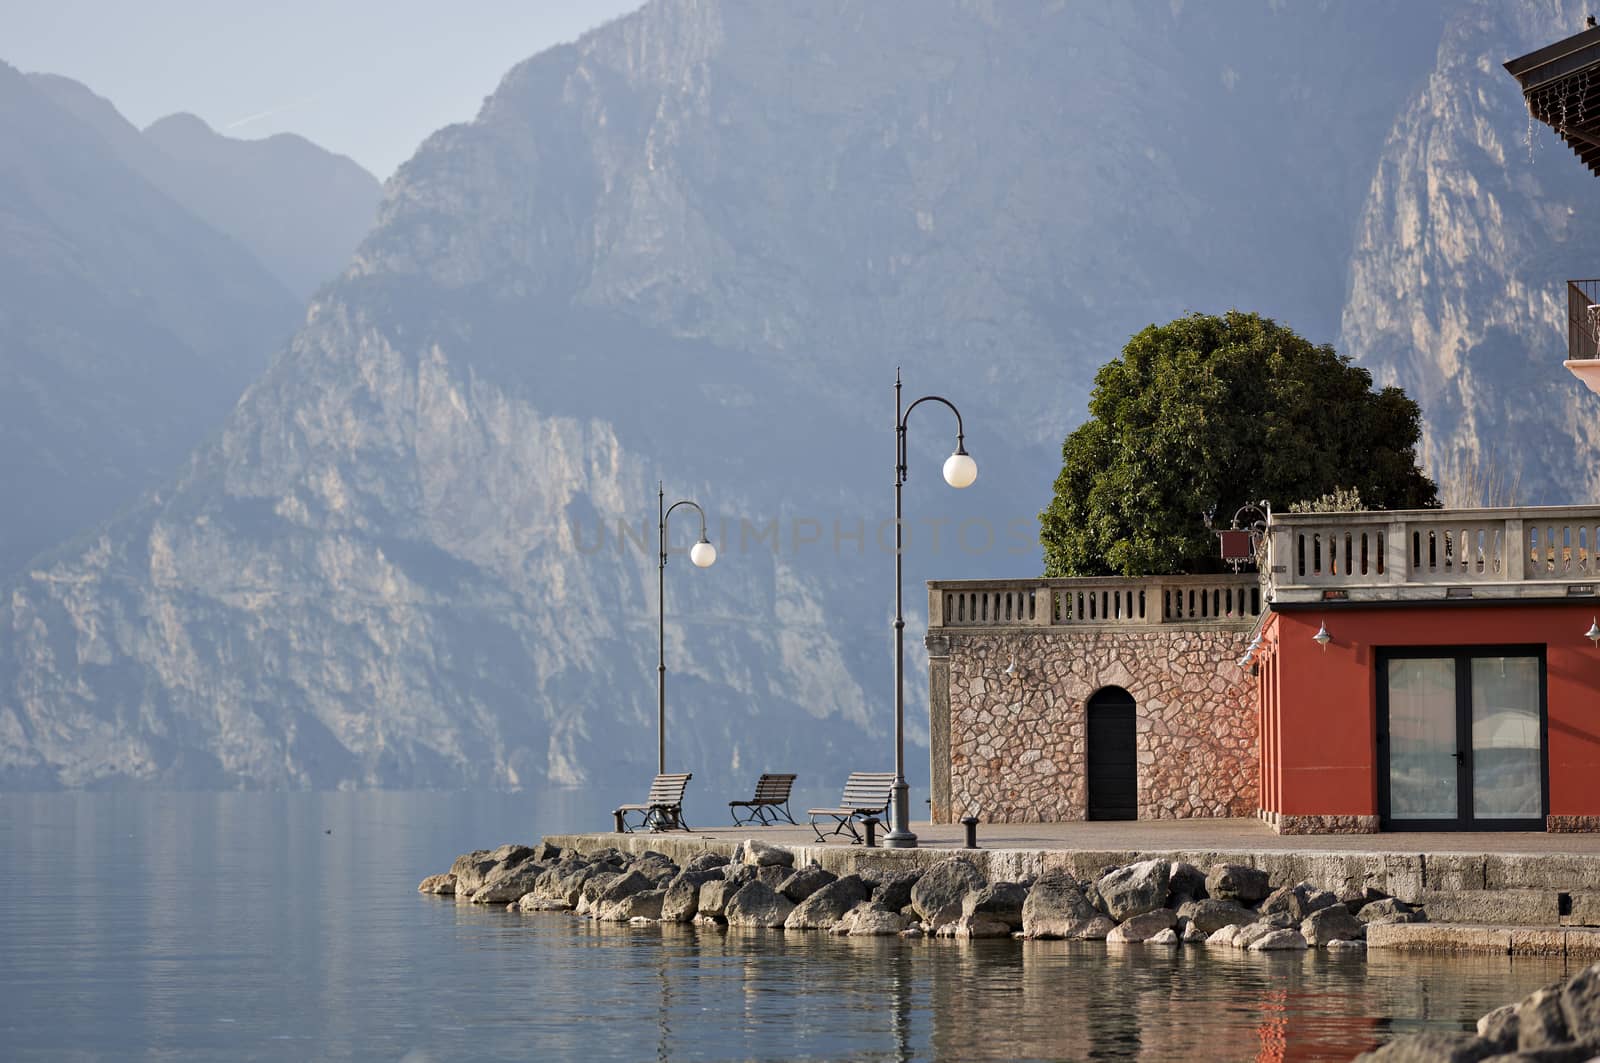 Three pews by the shore of Lake Garda in the northern Italy surrounded by mountains and water.